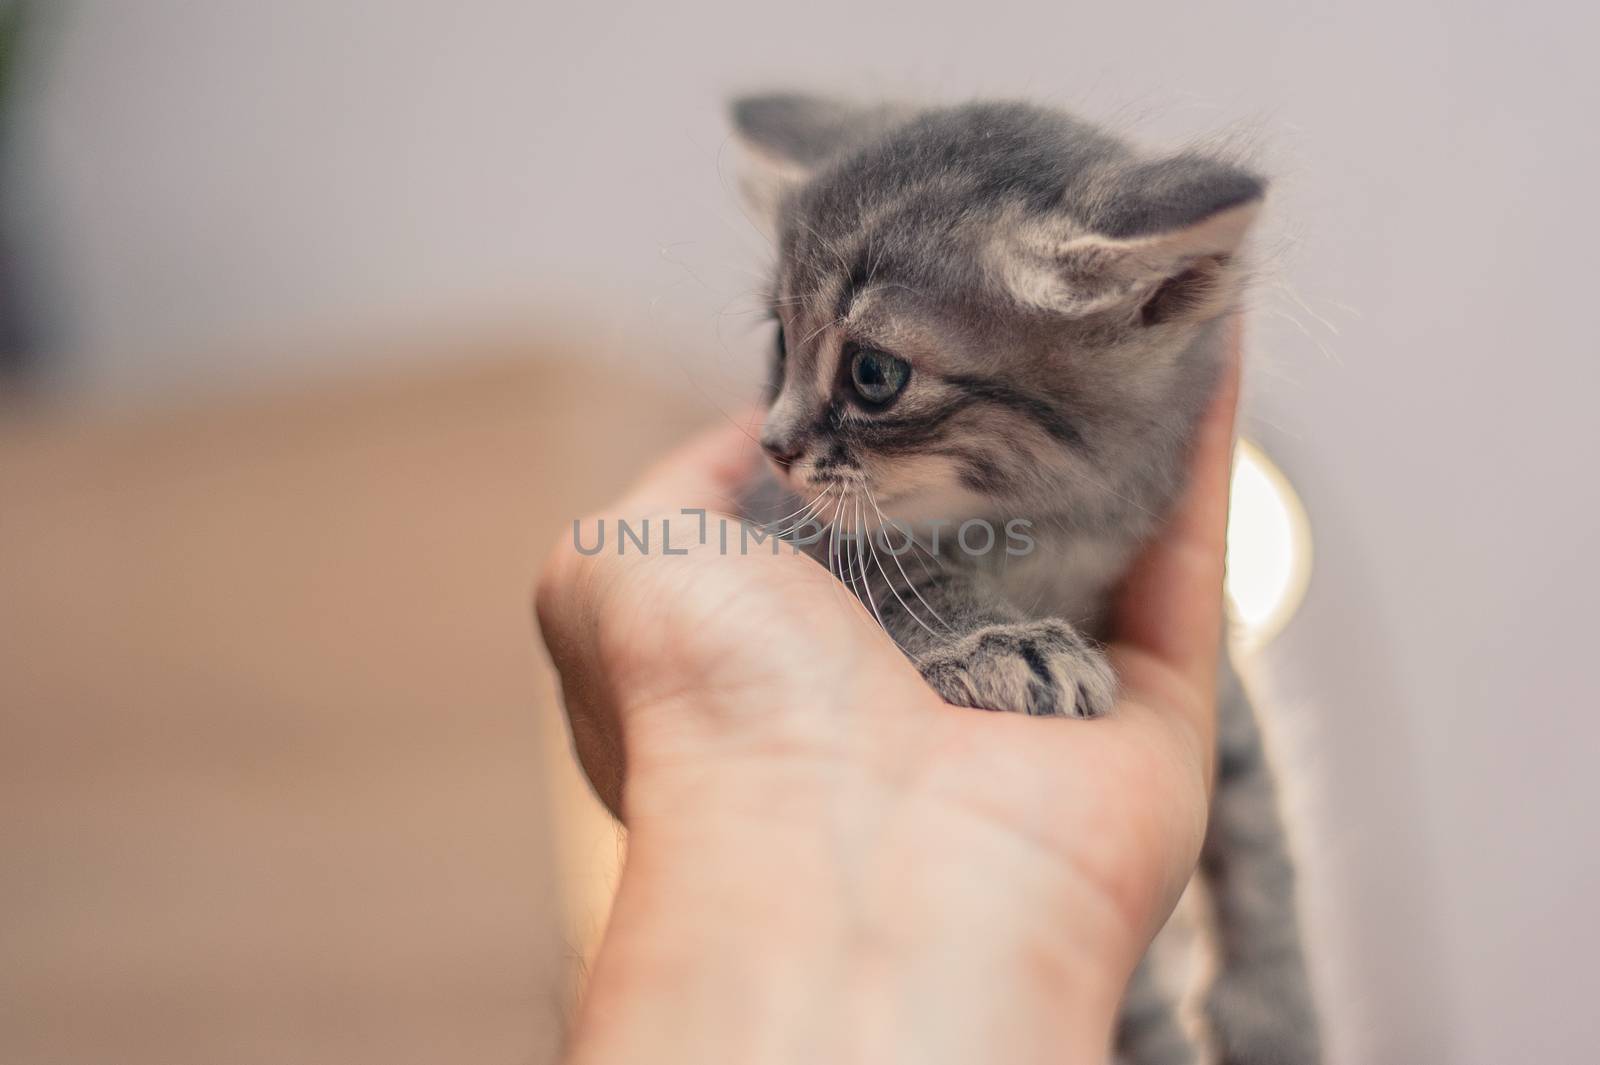 close portrait of a cute gray kitten on the hand by chernobrovin